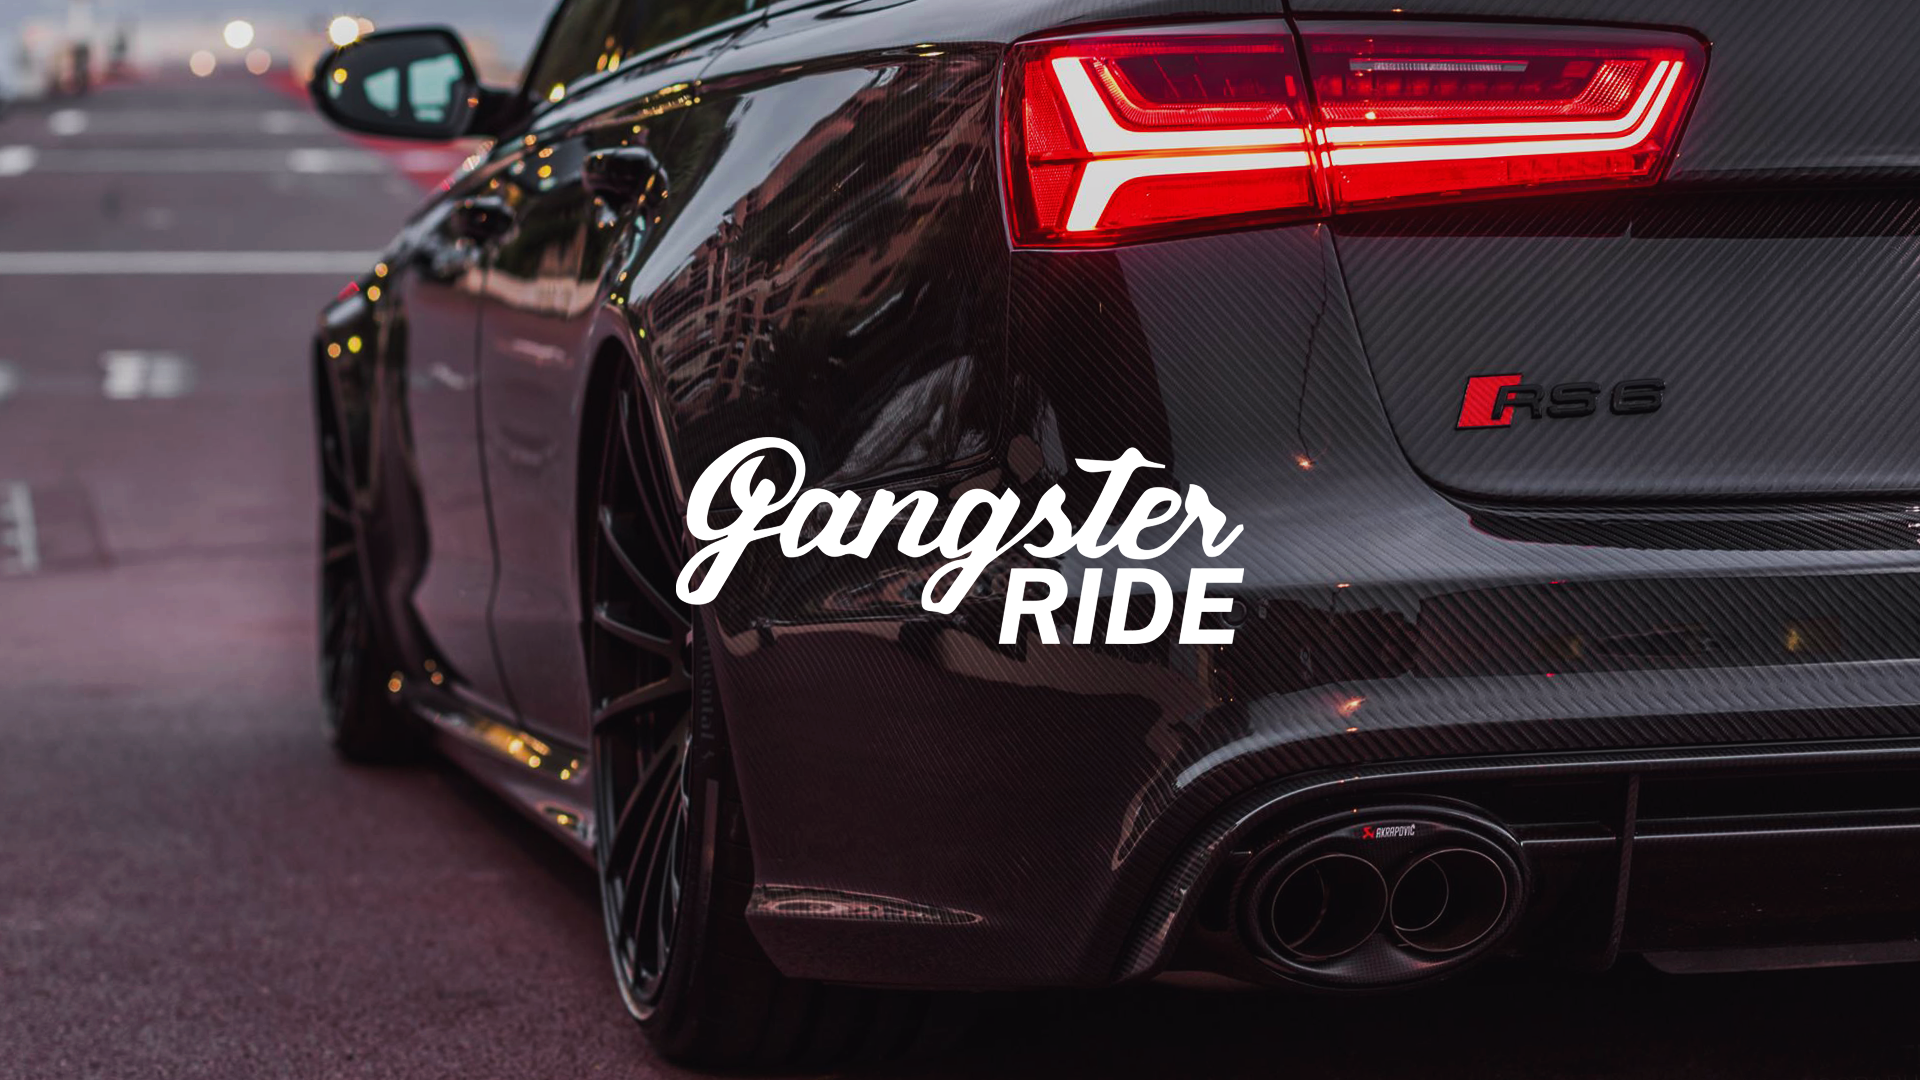 General 1920x1080 smoke smoking police low car BMX mask car gangster colorful YouTube Audi RS6 Avant Audi typography black cars vehicle